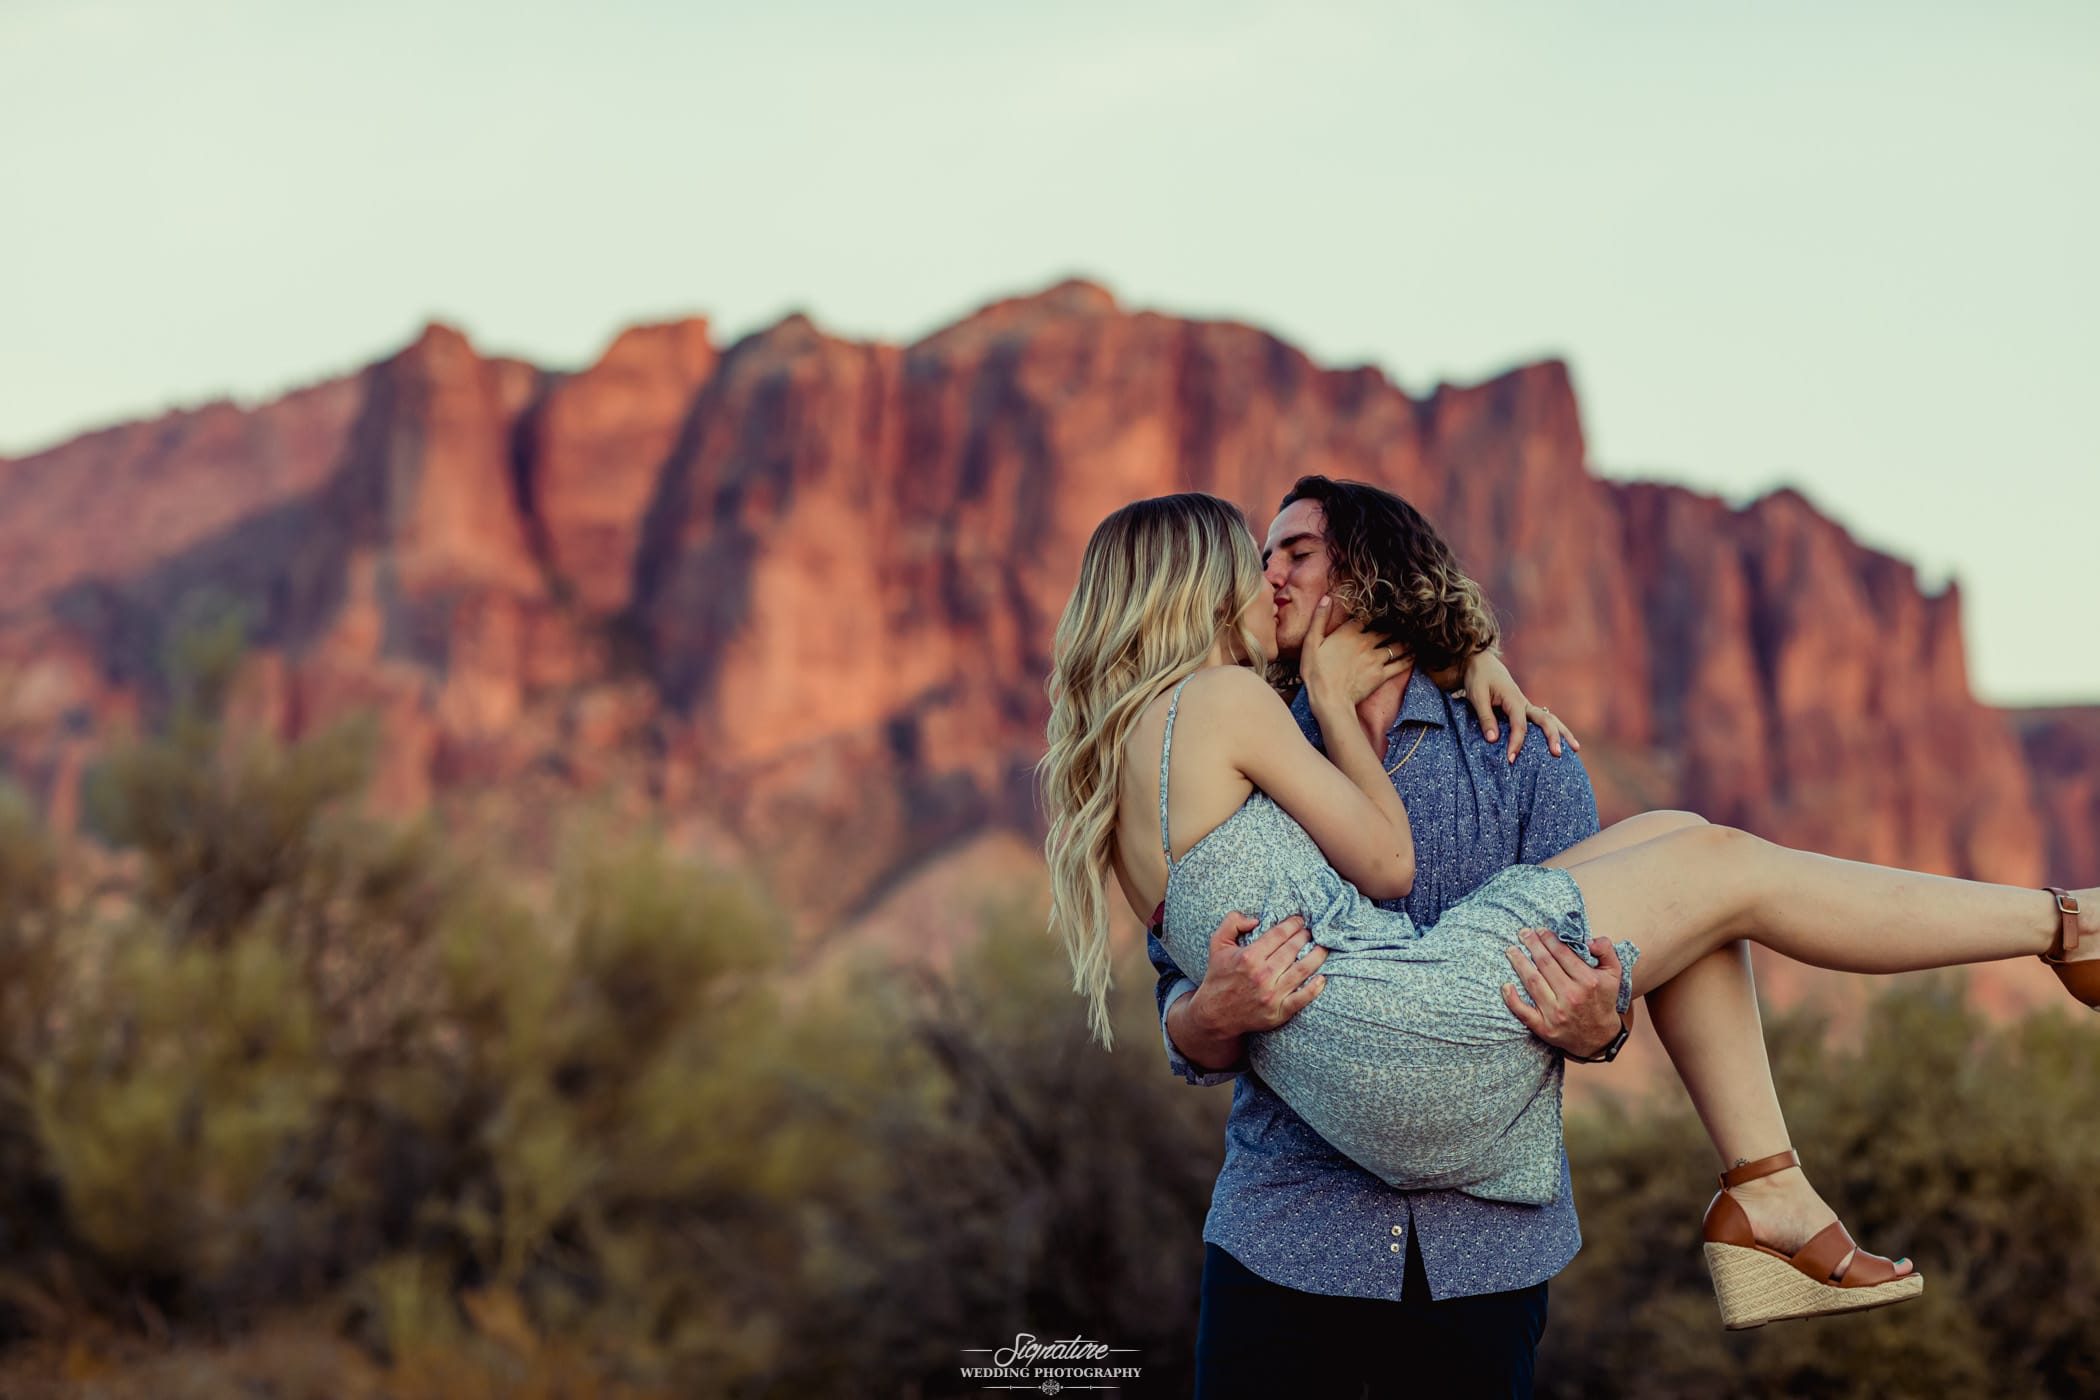 Guy holding girl in arms and kissing in desert